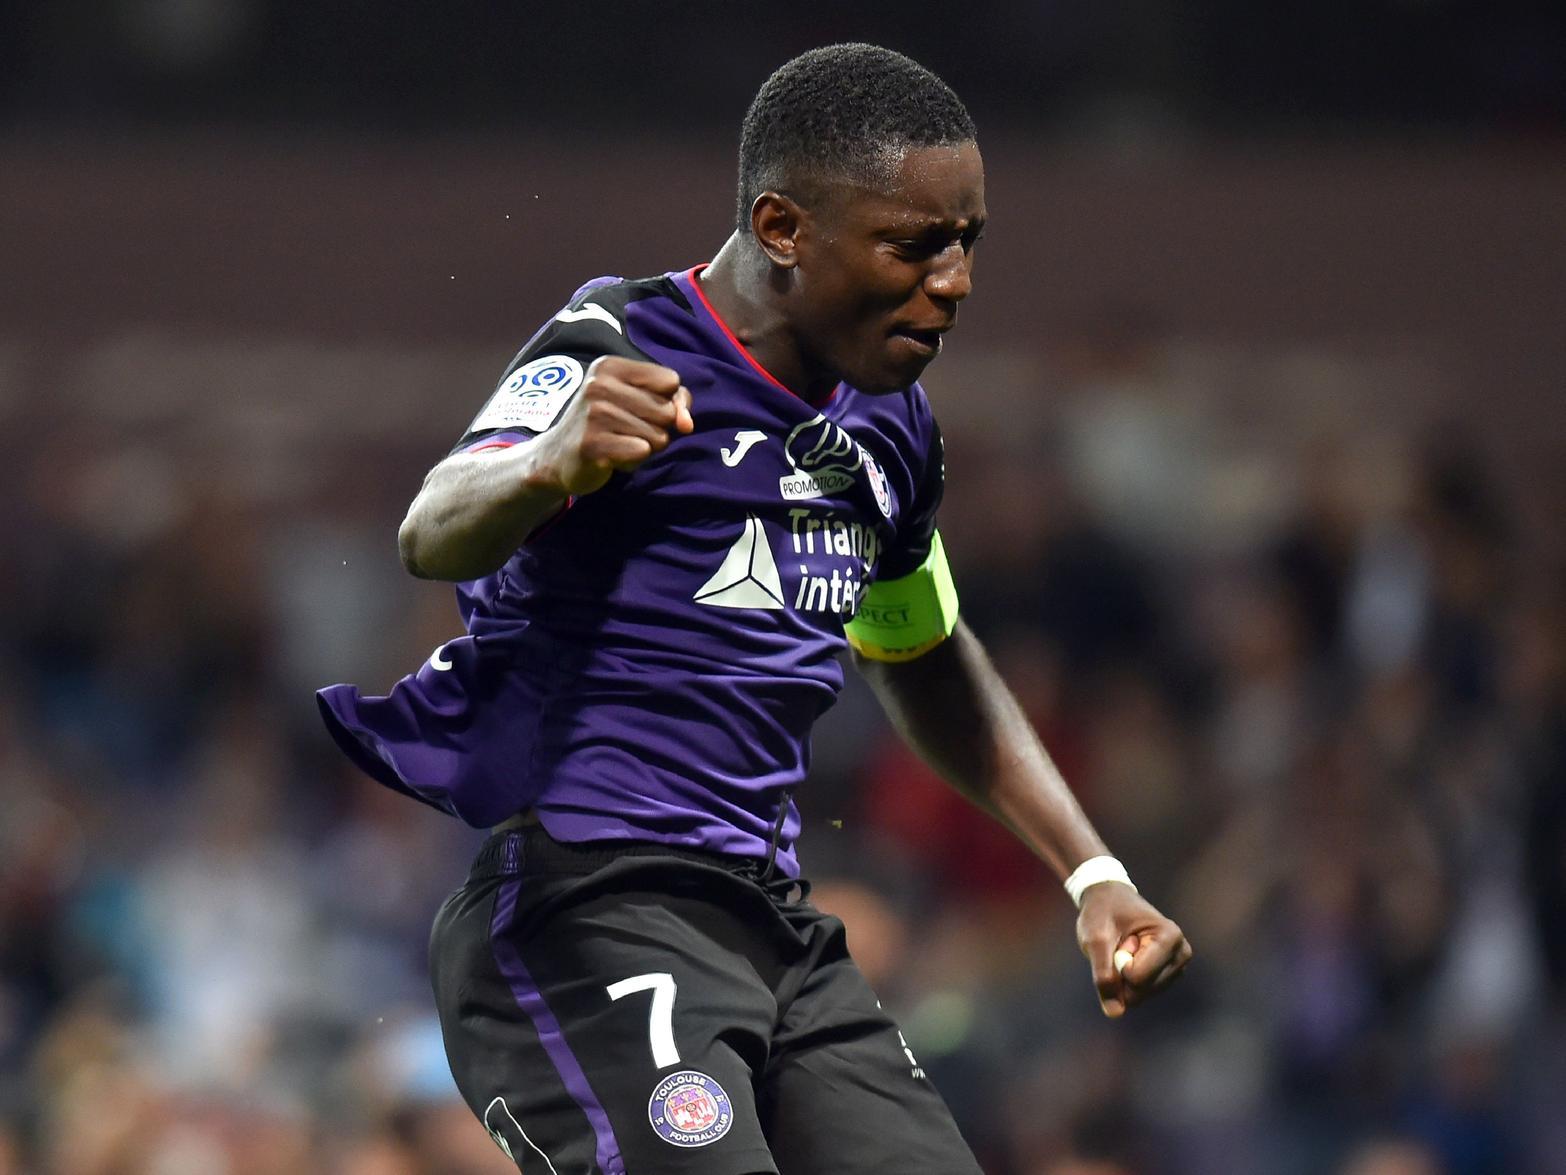 After an impressive 18-goal campaign in his second year at the club, Gradel was snapped up French outfit AS Saint-Etienne. He's now Toulouse, following an injury-blighted spell with Bournemouth.